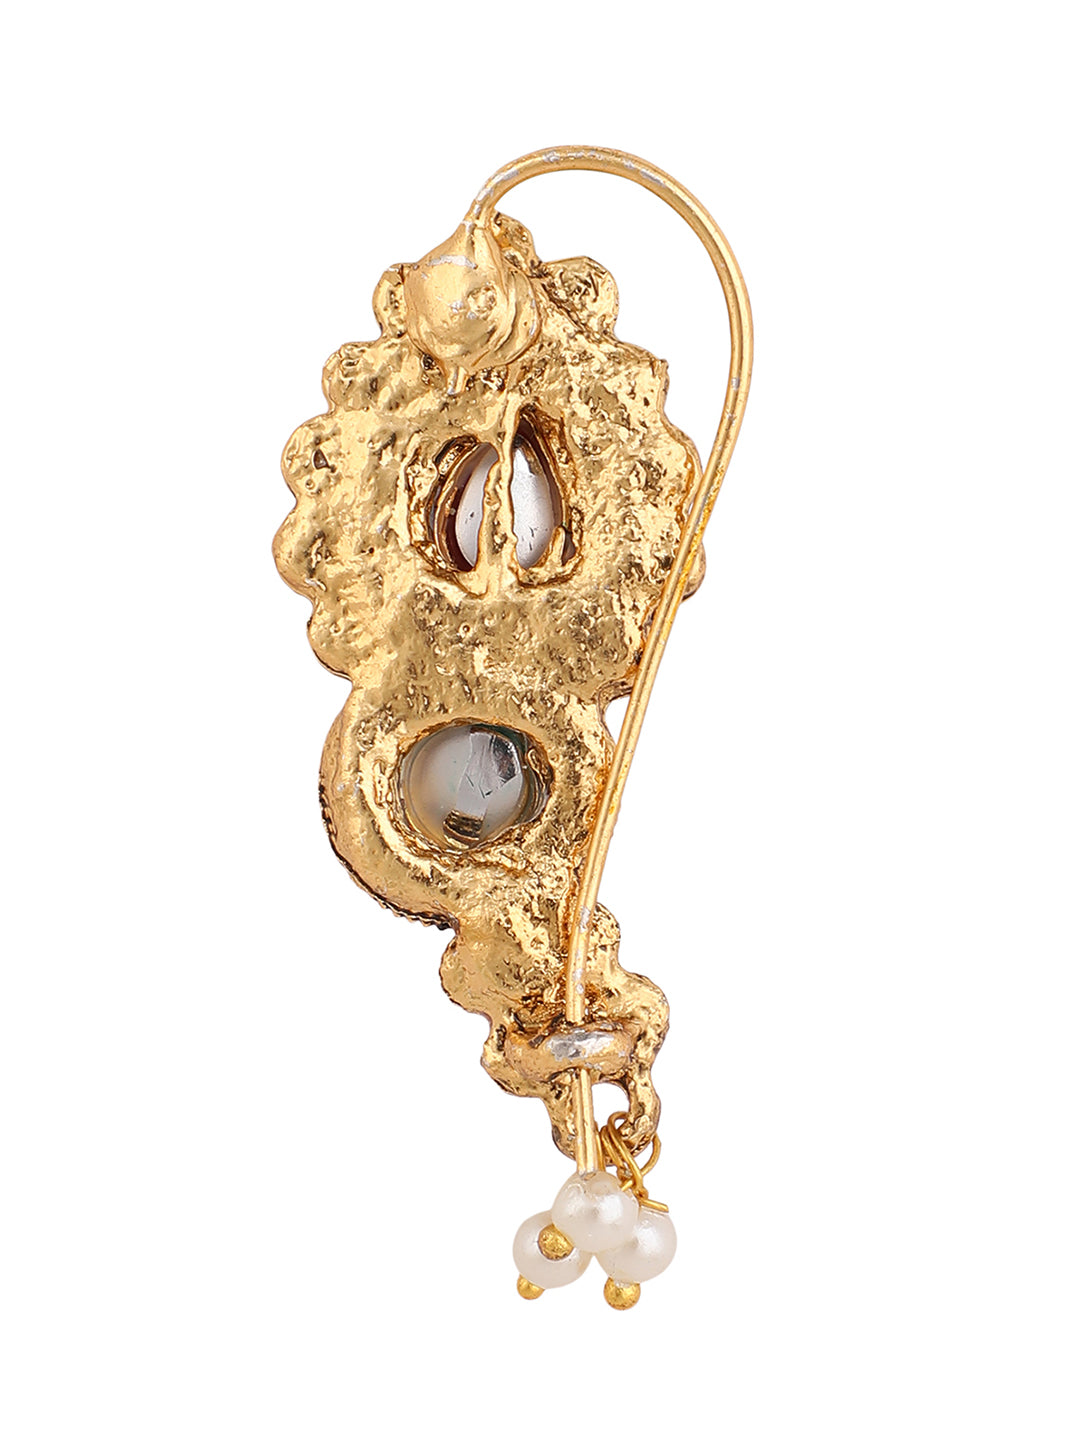 Pearl Maharashtrian Nath Nose Pin For Women By Anikas Creation